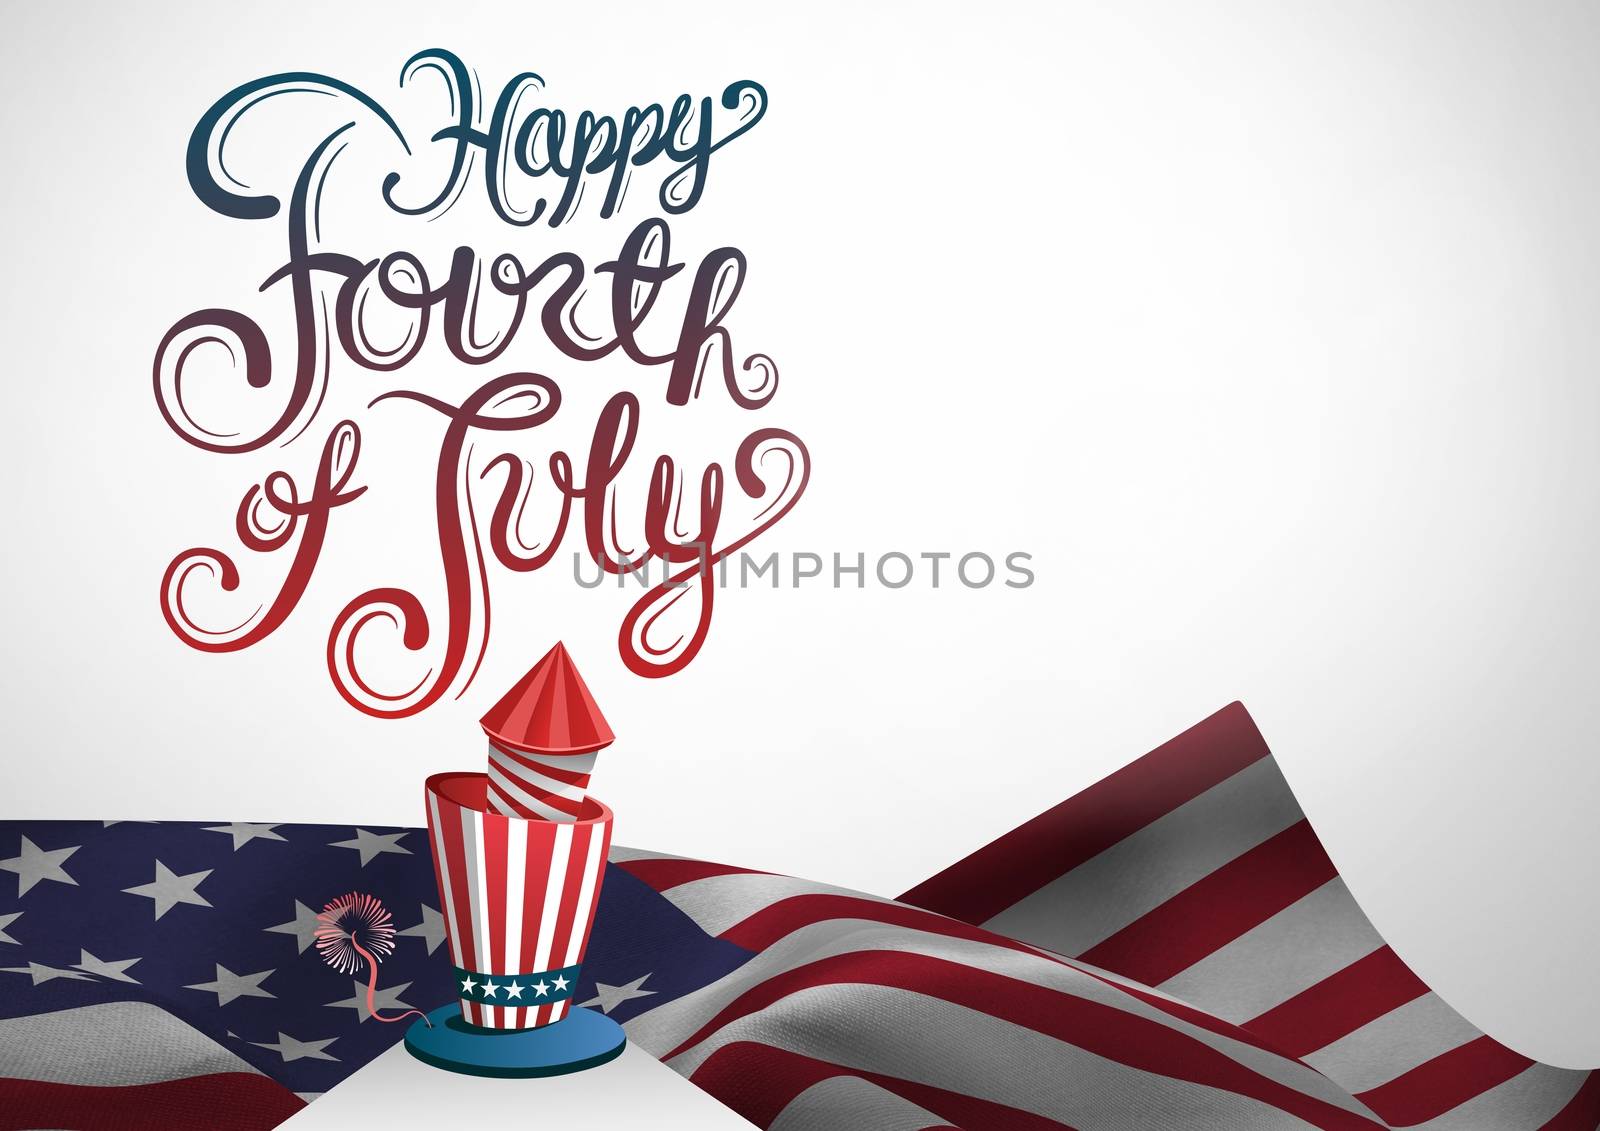 Composite image for the 4th of July with american flag by Wavebreakmedia